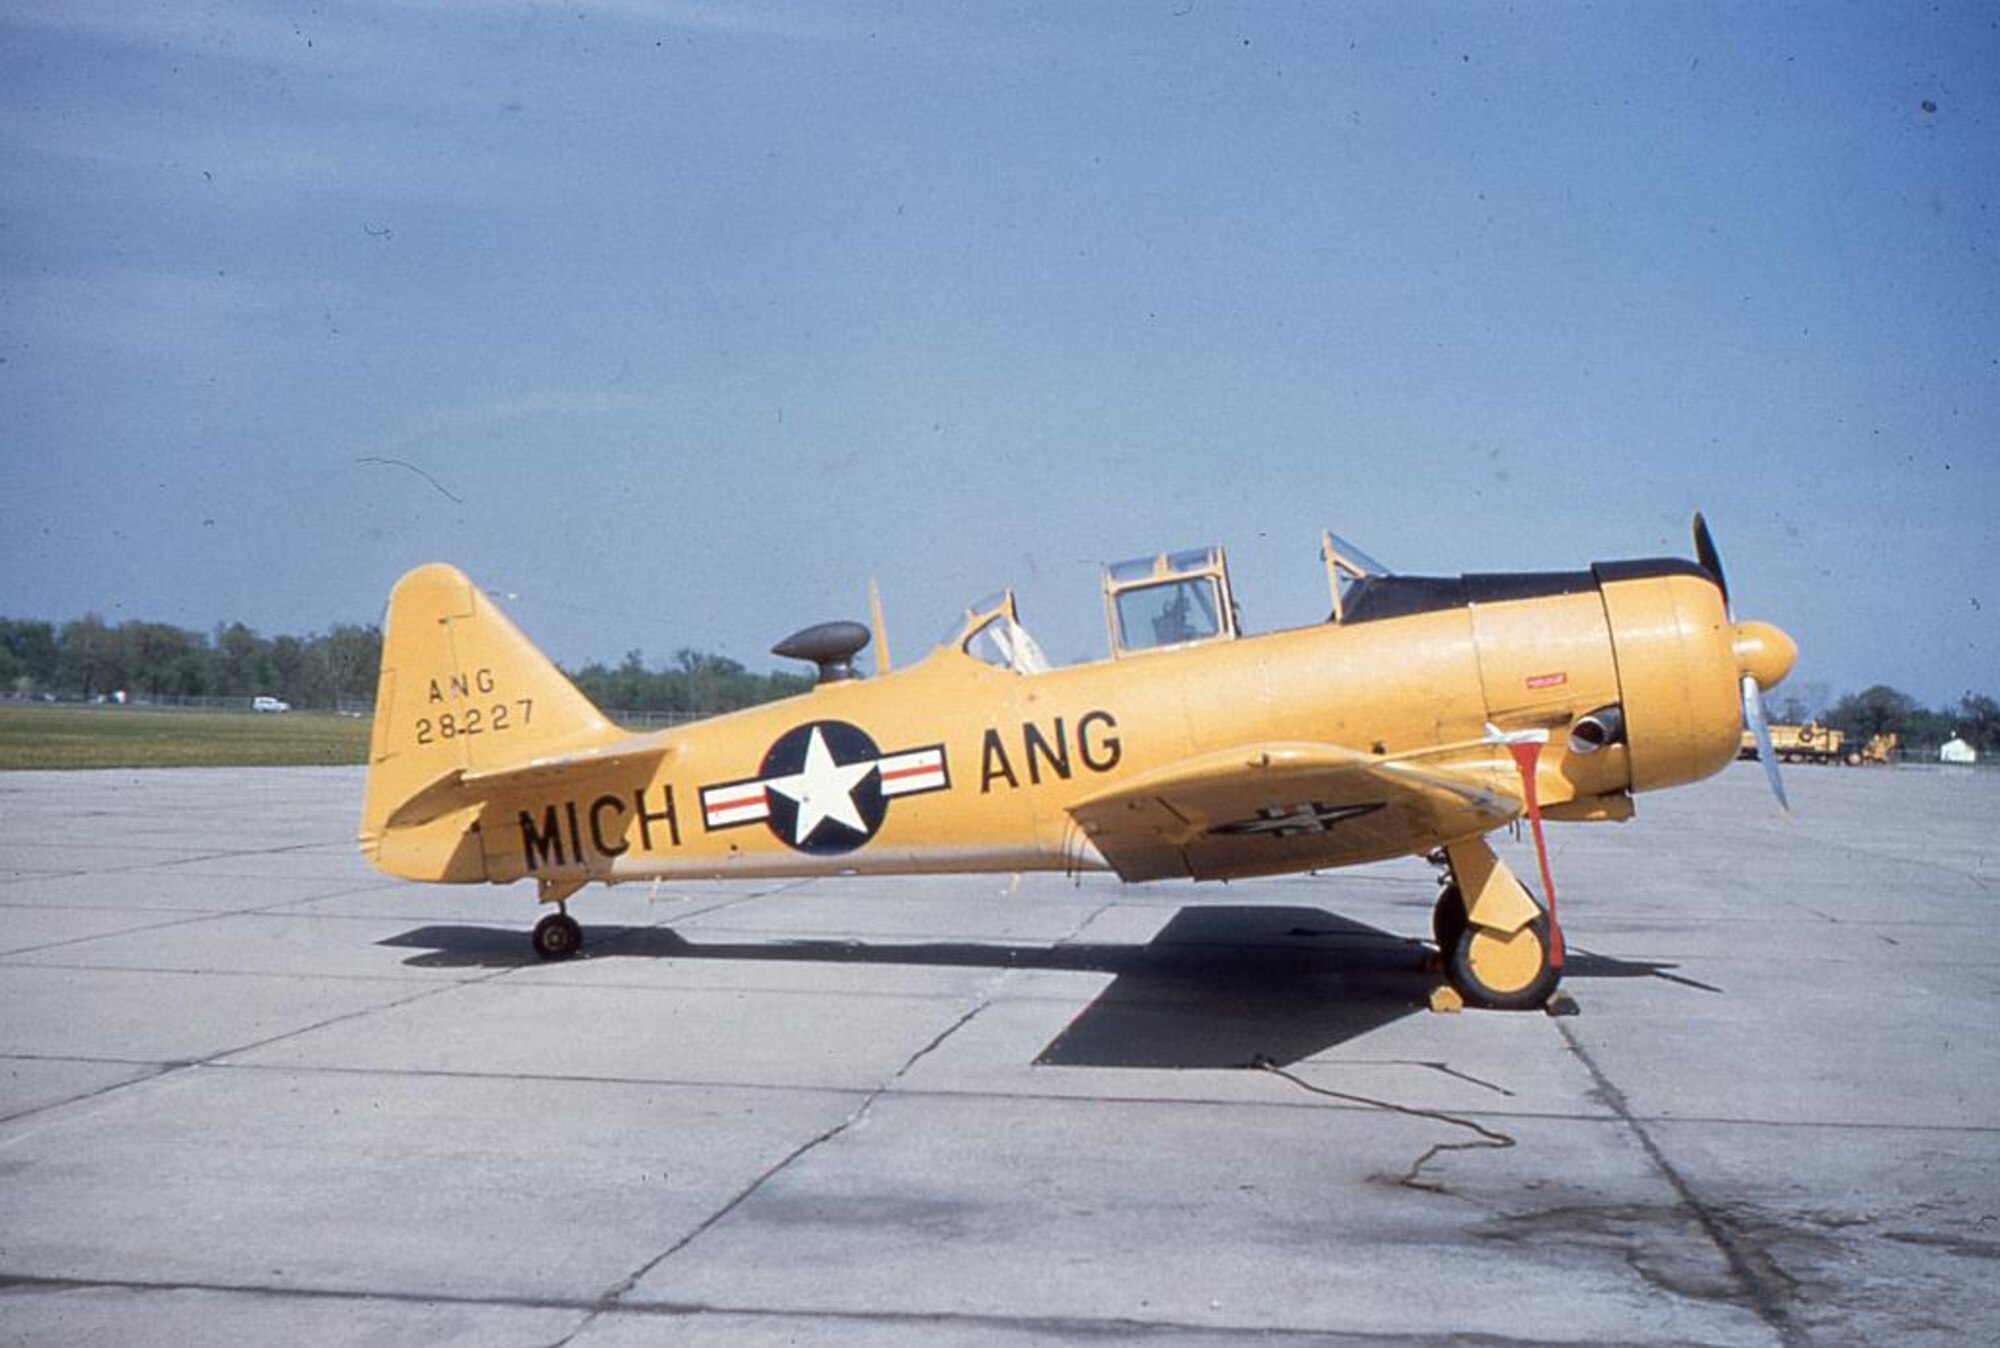 This T-6 Texan will soon be added to the air park display at the Selfridge Military Museum at Selfridge Air National Guard Base. The single-engine trainer was flown by the Michigan Air National Guard from 1946 until 1955. It is painted in colors appropriate to that era. All of the more than 30 aircraft on display at the museum were either operated by the Michigan ANG or by another military unit at a base in the state of Michigan. (Courtesy photo) 